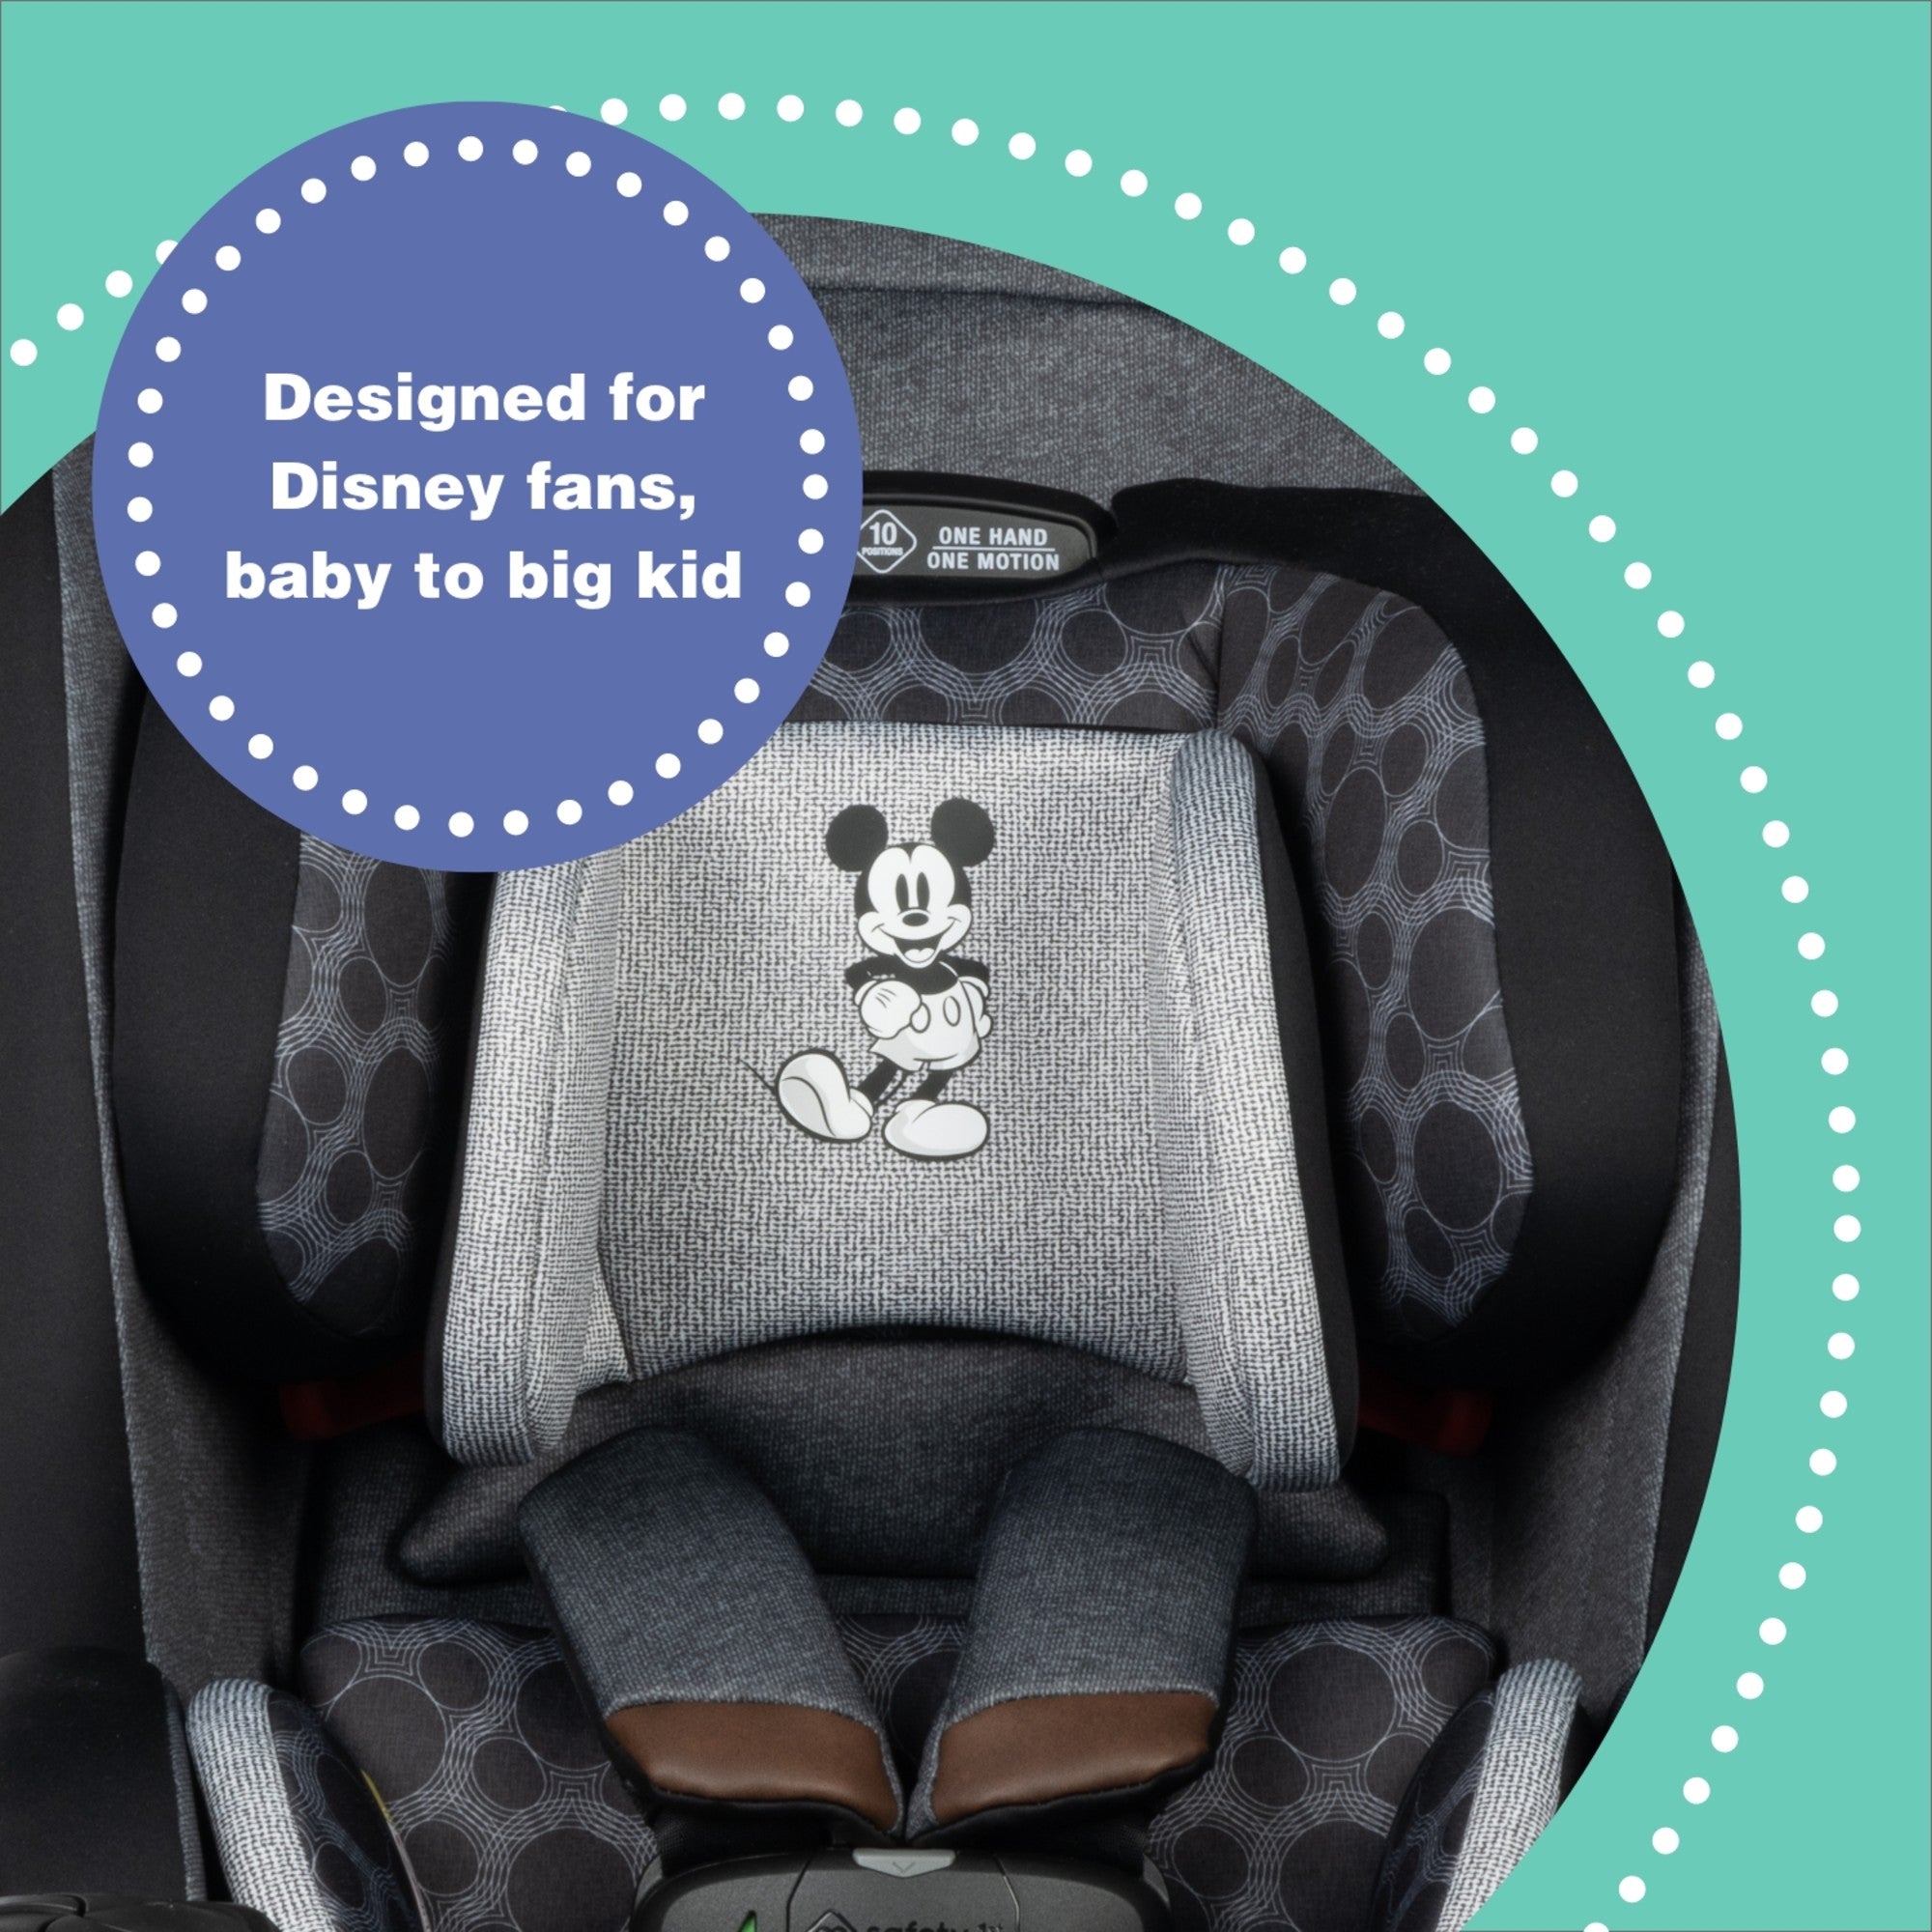 Disney Baby EverSlim All-in-One Convertible Car Seat - designed for Disney fans, baby to big kid